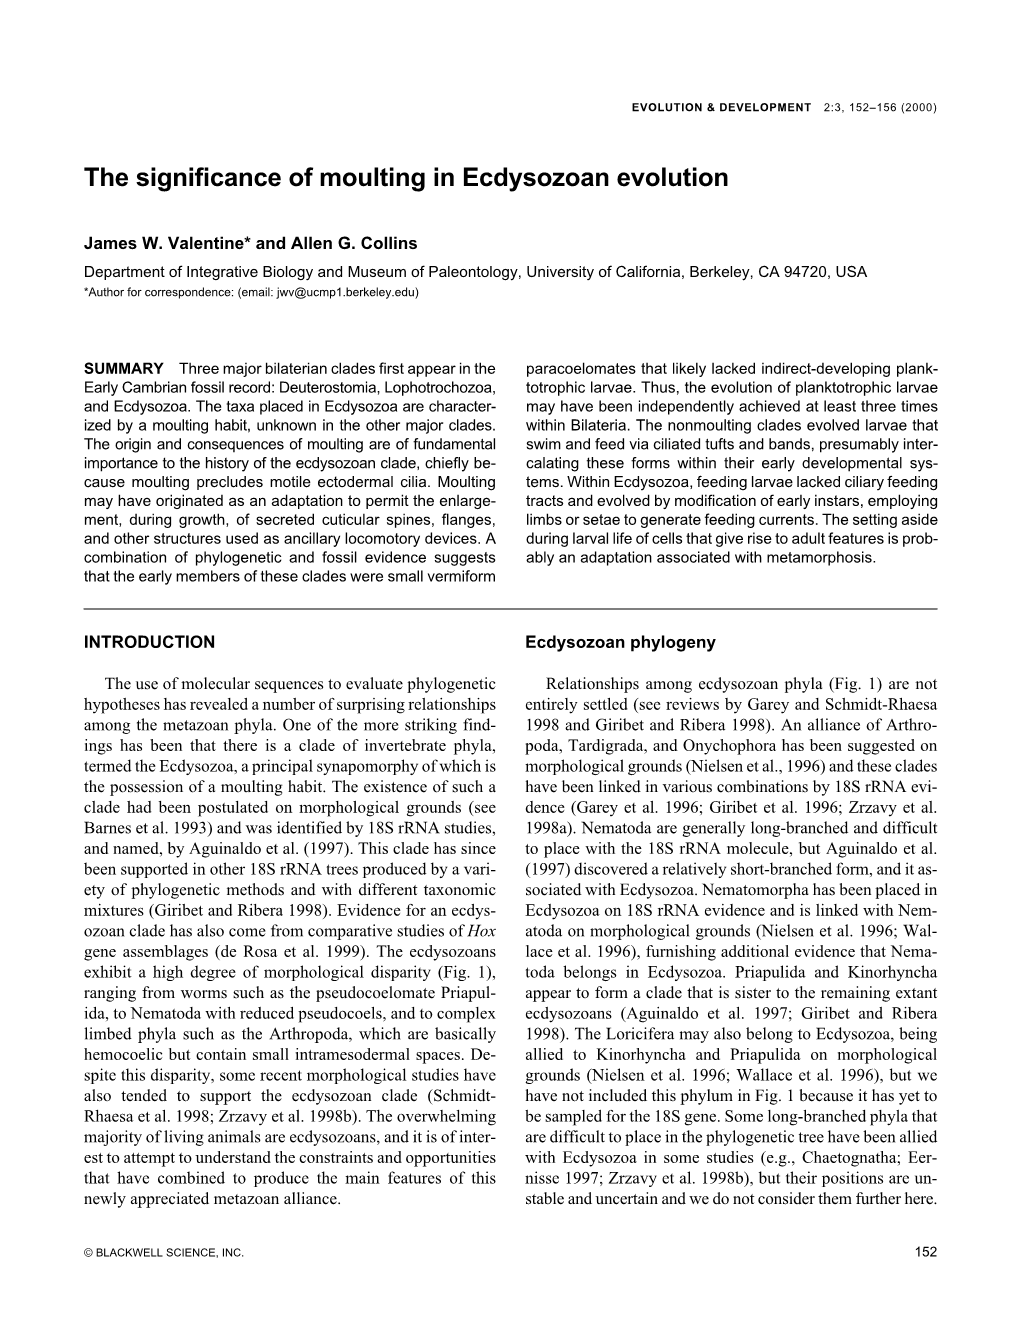 The Significance of Moulting in Ecdysozoan Evolution